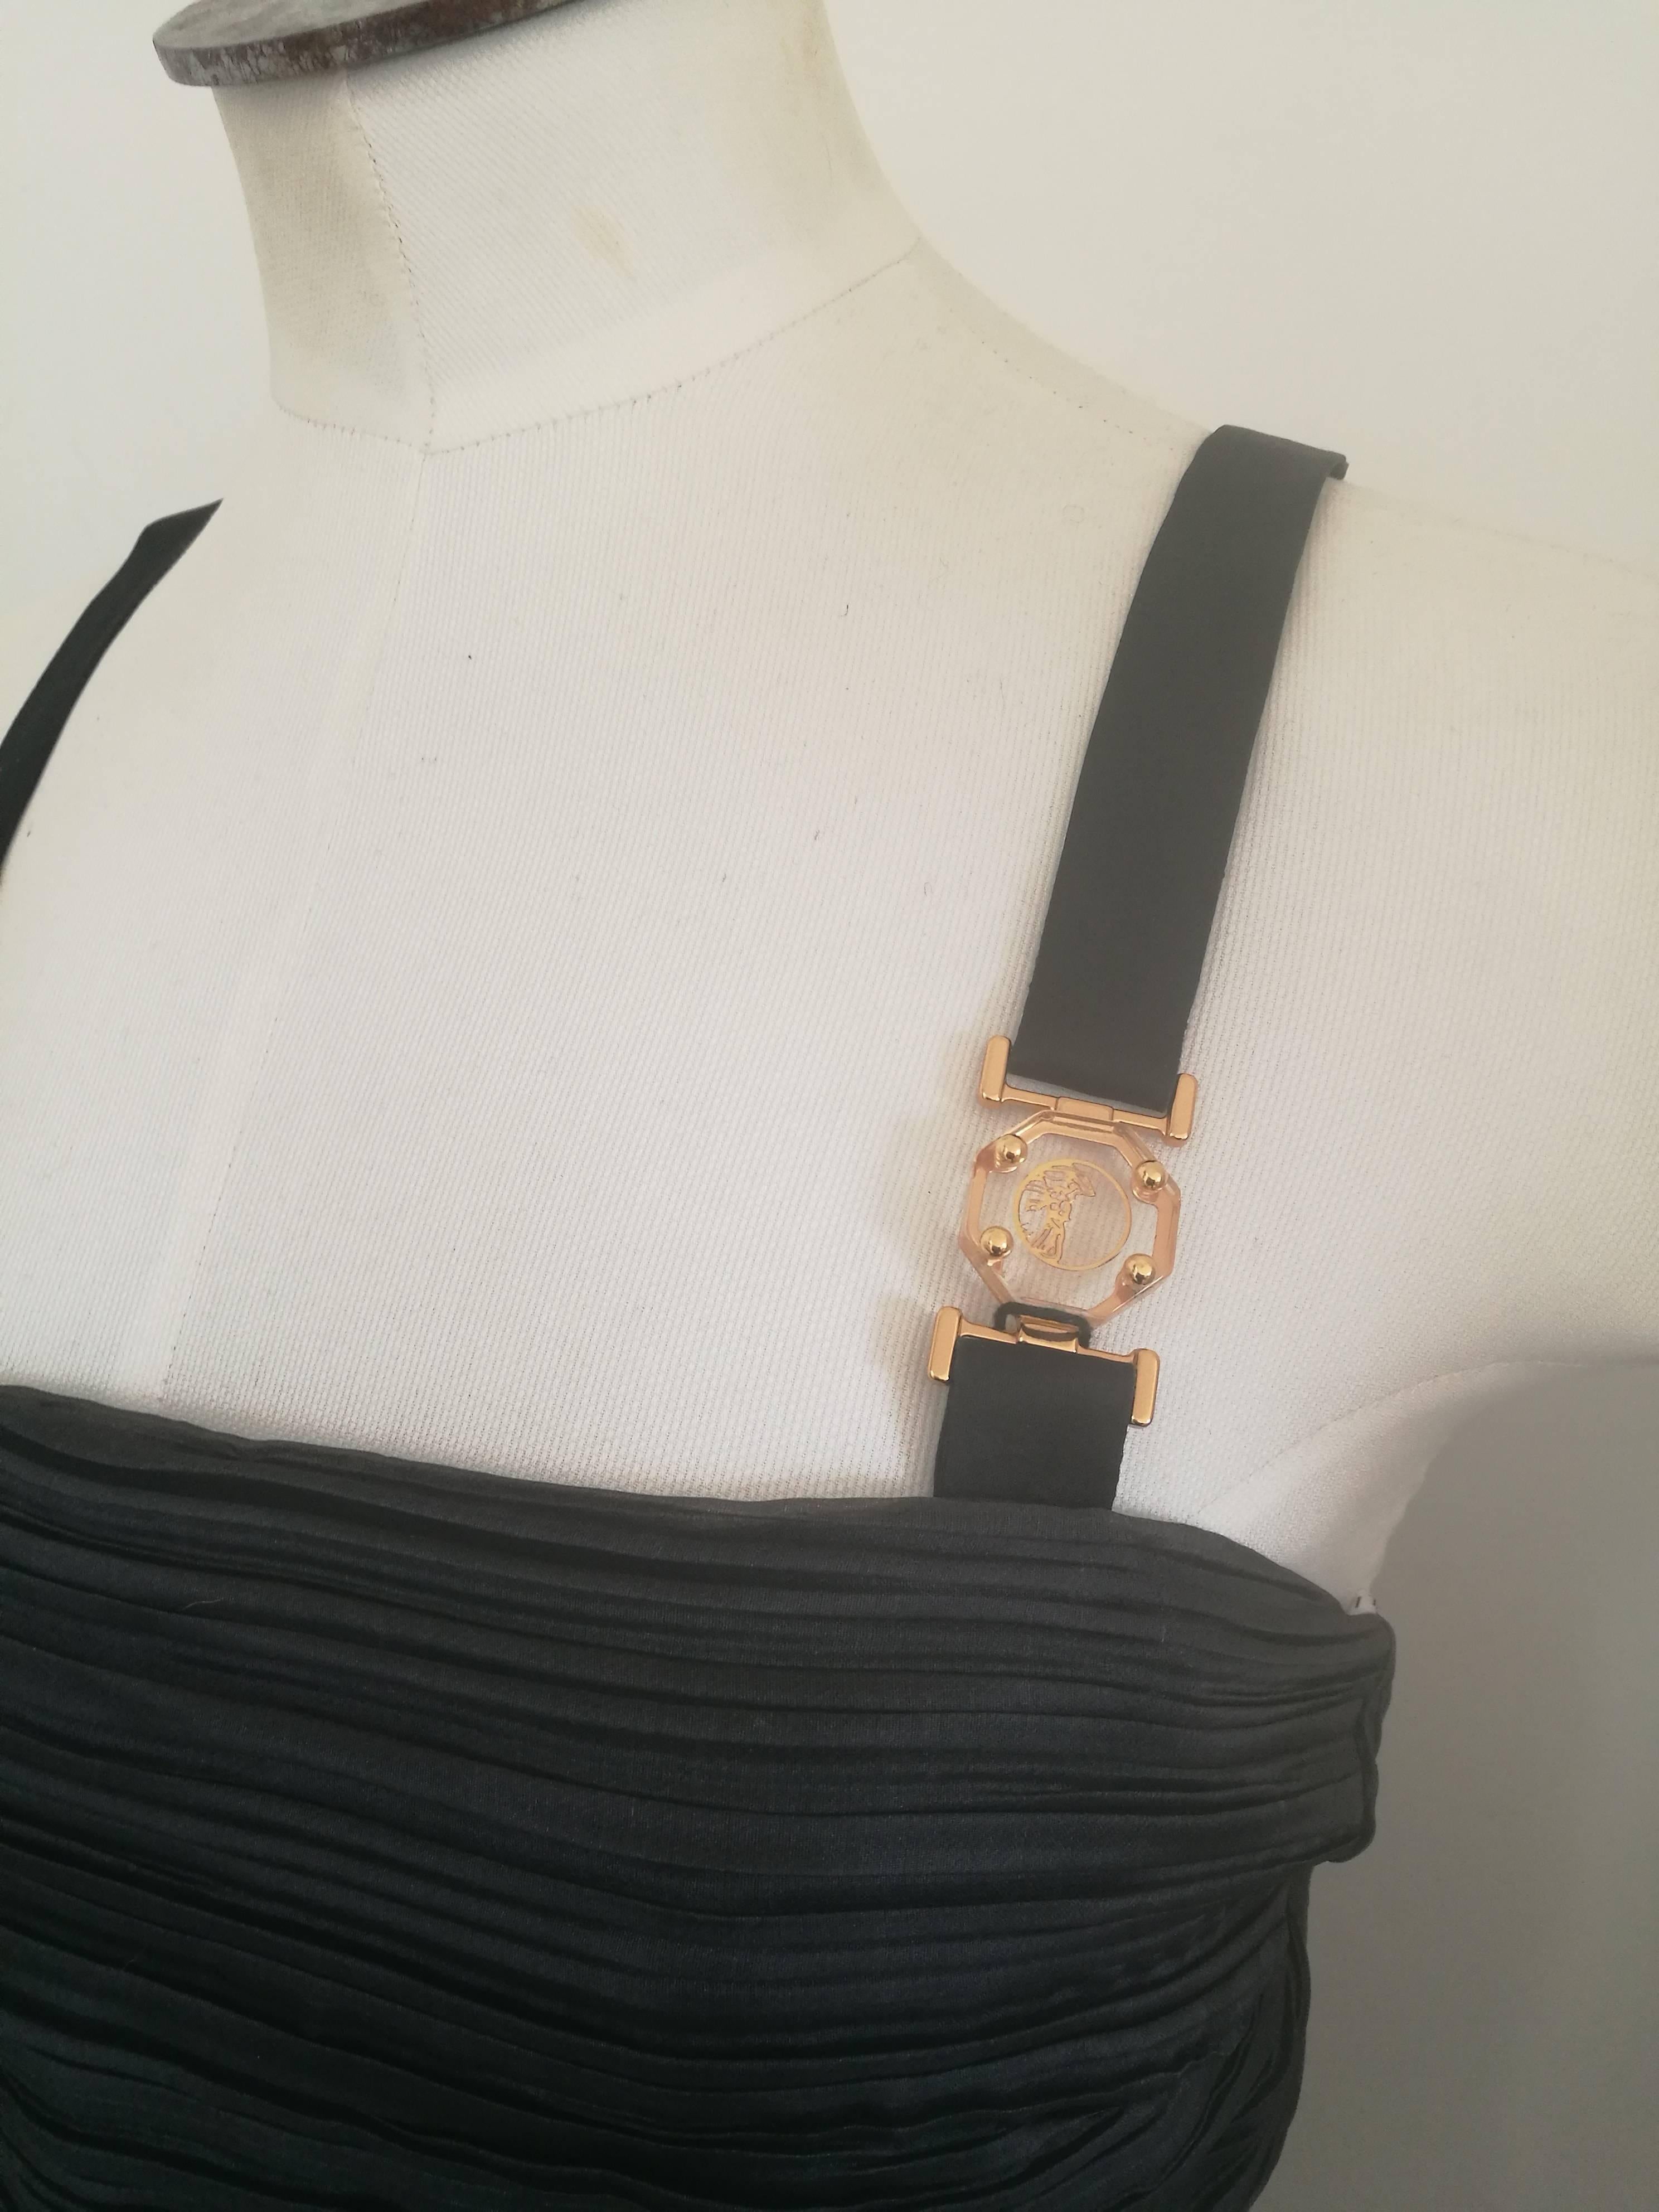 Versus by Gianni Versace Black Dress NWOT
Embellished Gold tone straps
Totally made in italy in italian size range 38
